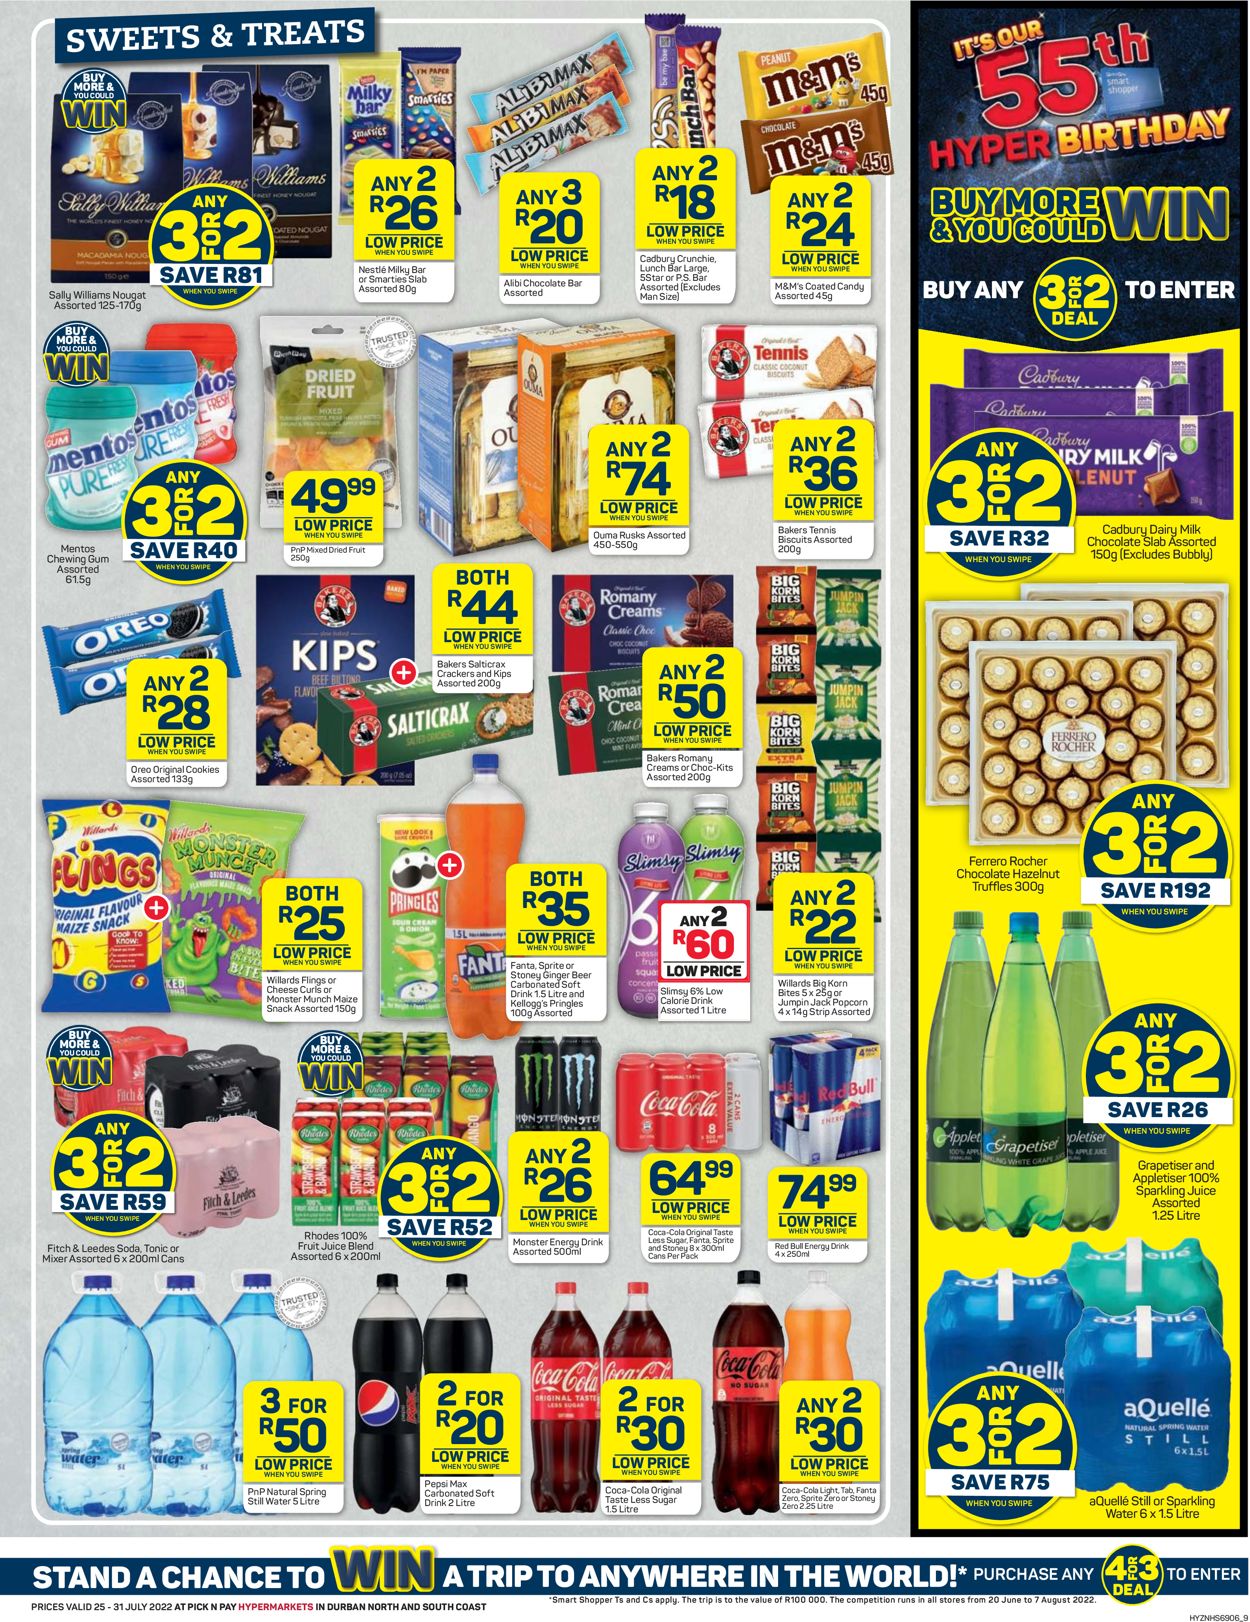 Pick n Pay Catalogue - 2022/07/25-2022/07/31 (Page 9)